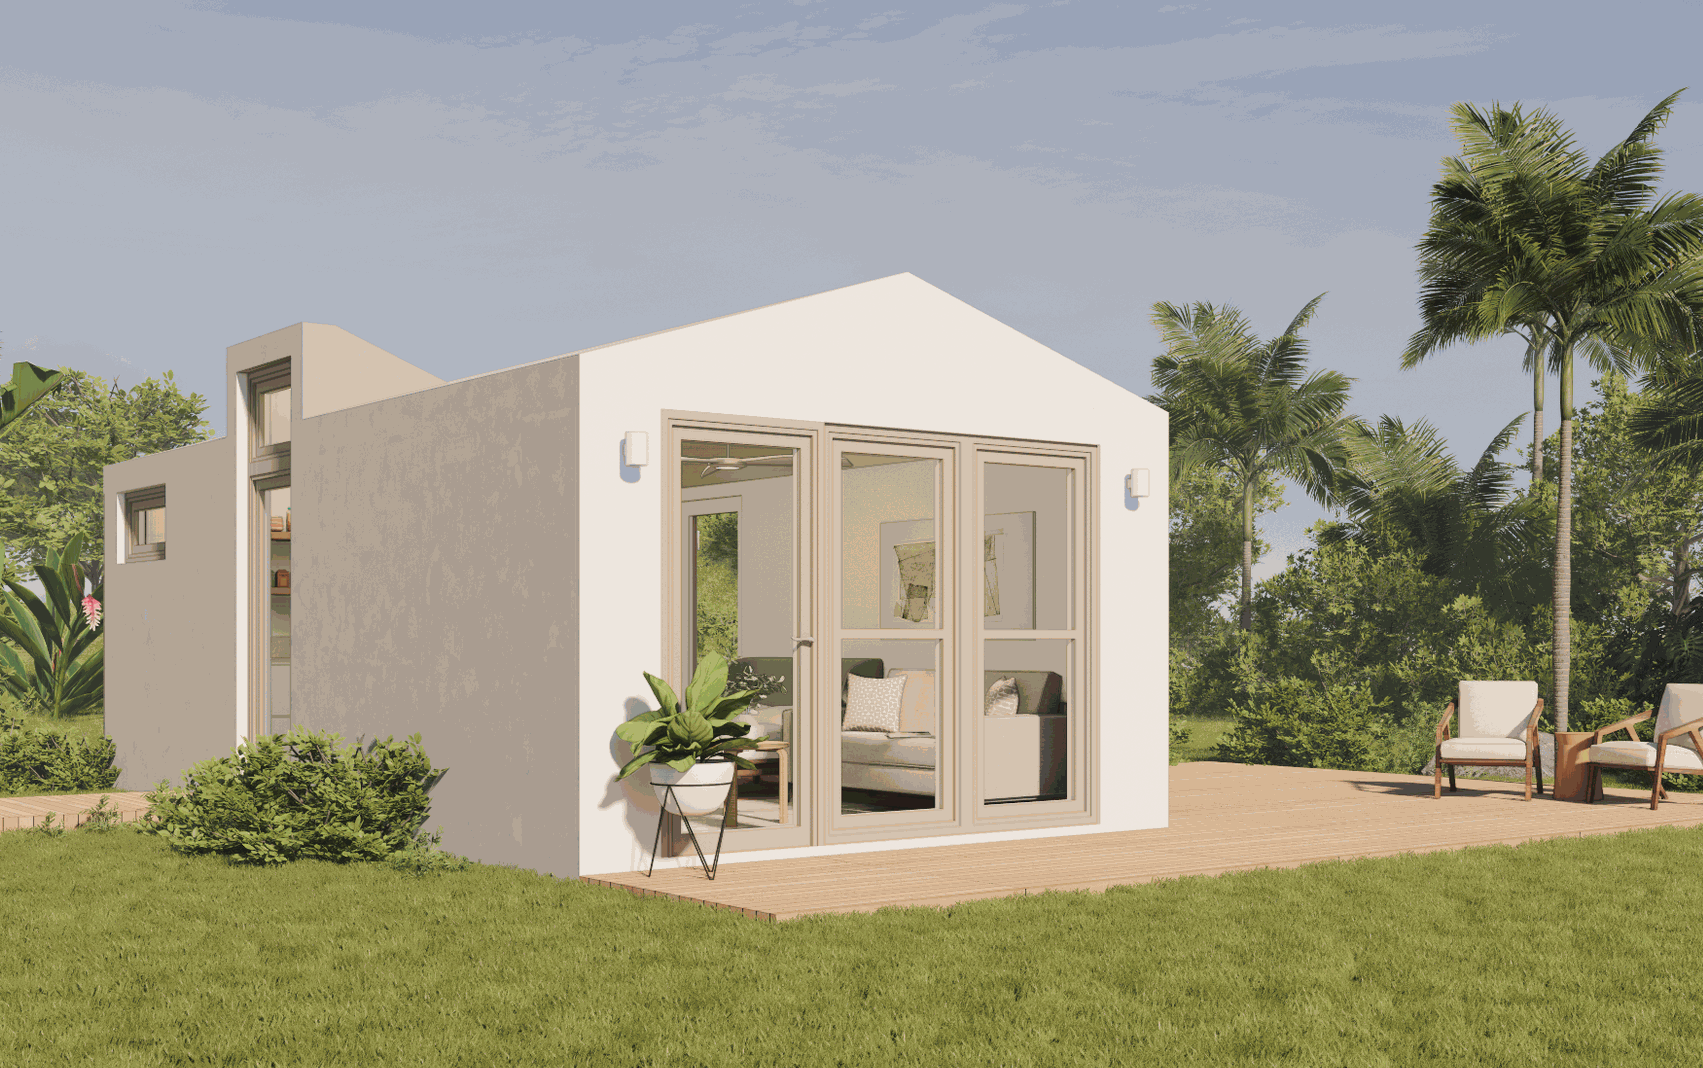 Choosing CASA-i Prefabricated Houses in Puerto Rico: A Sustainable and Intelligent Living Choice